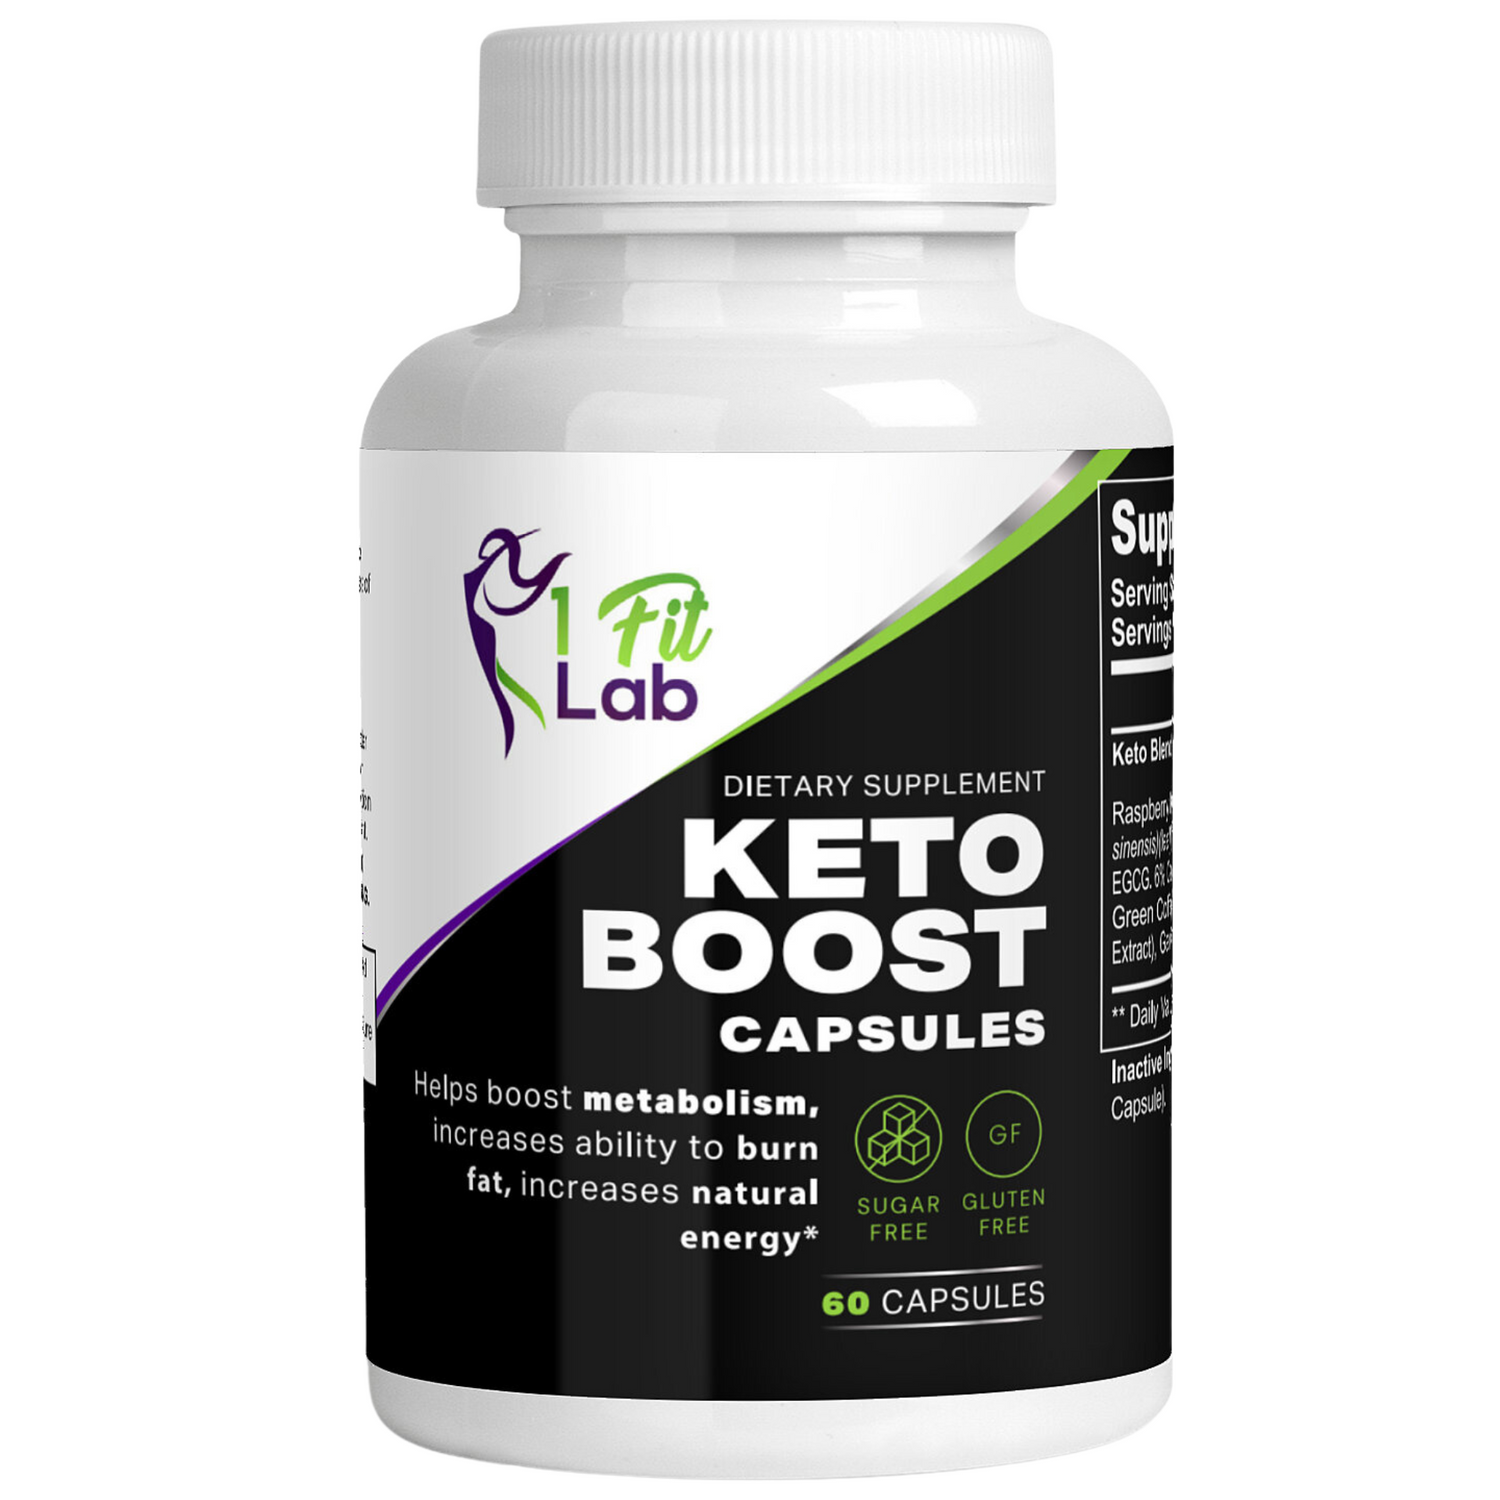 Bottle of Keto Boost supplement with Raspberry Ketones and Green Tea Extract for ketogenic support